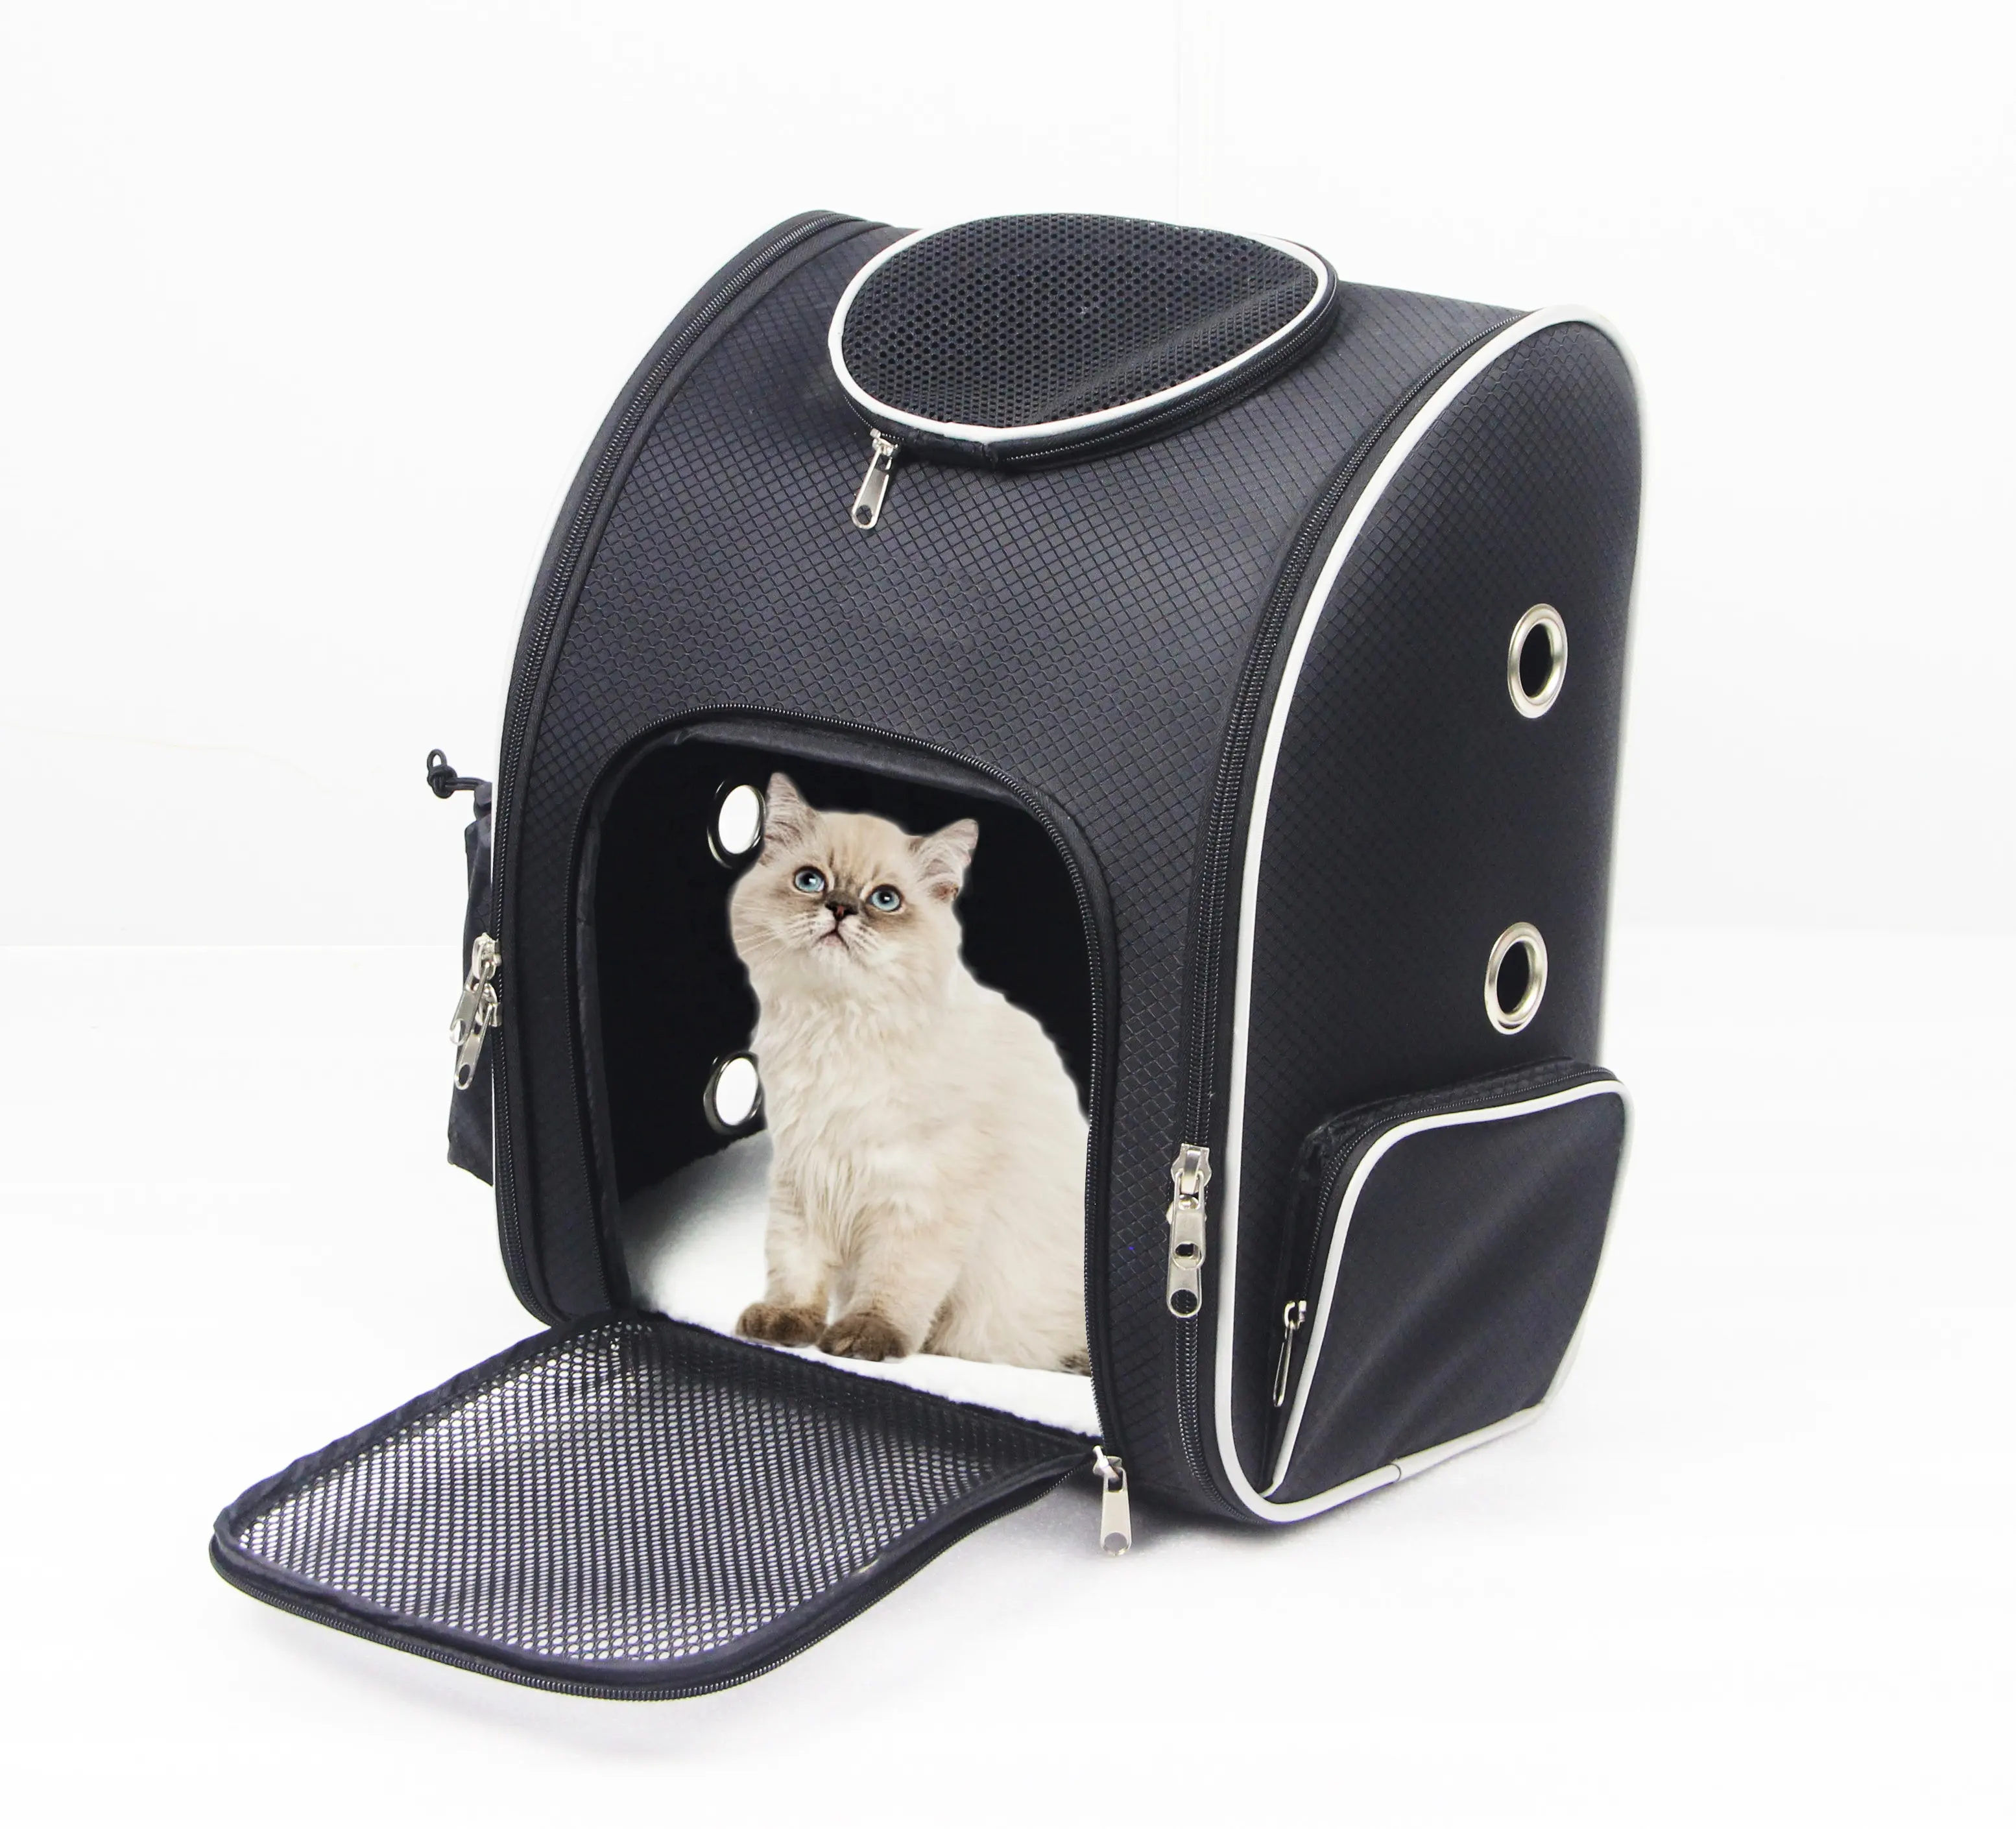 Airline Approved Air Ventilation High Quality Pet Transport Carrier Backpack Pet Cages Carriers & Houses Small Animals Solid